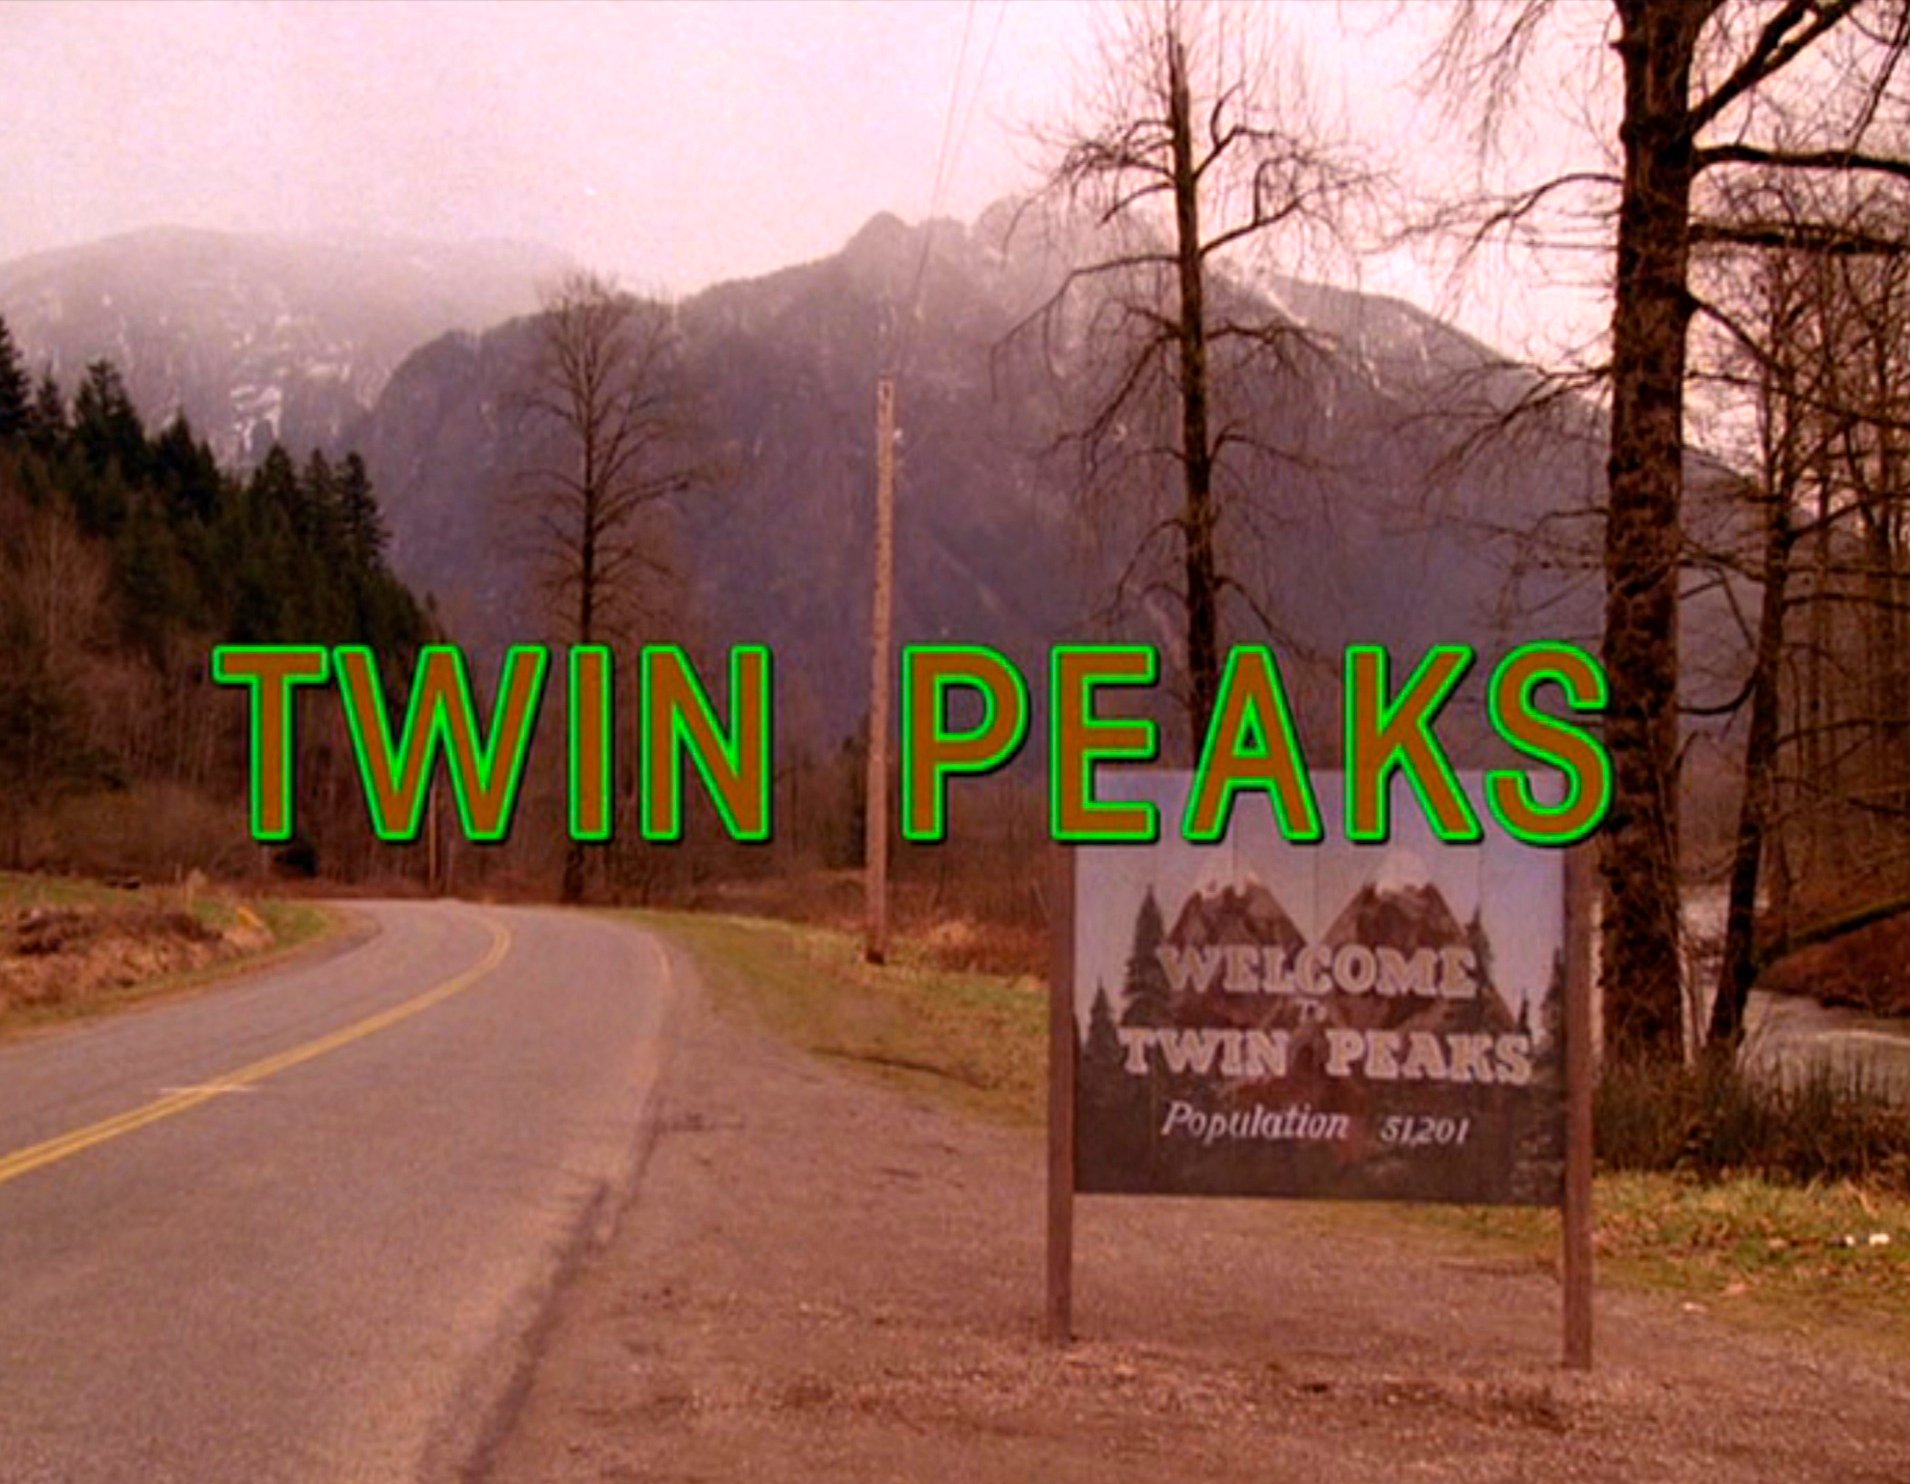 The Twin Peaks sign